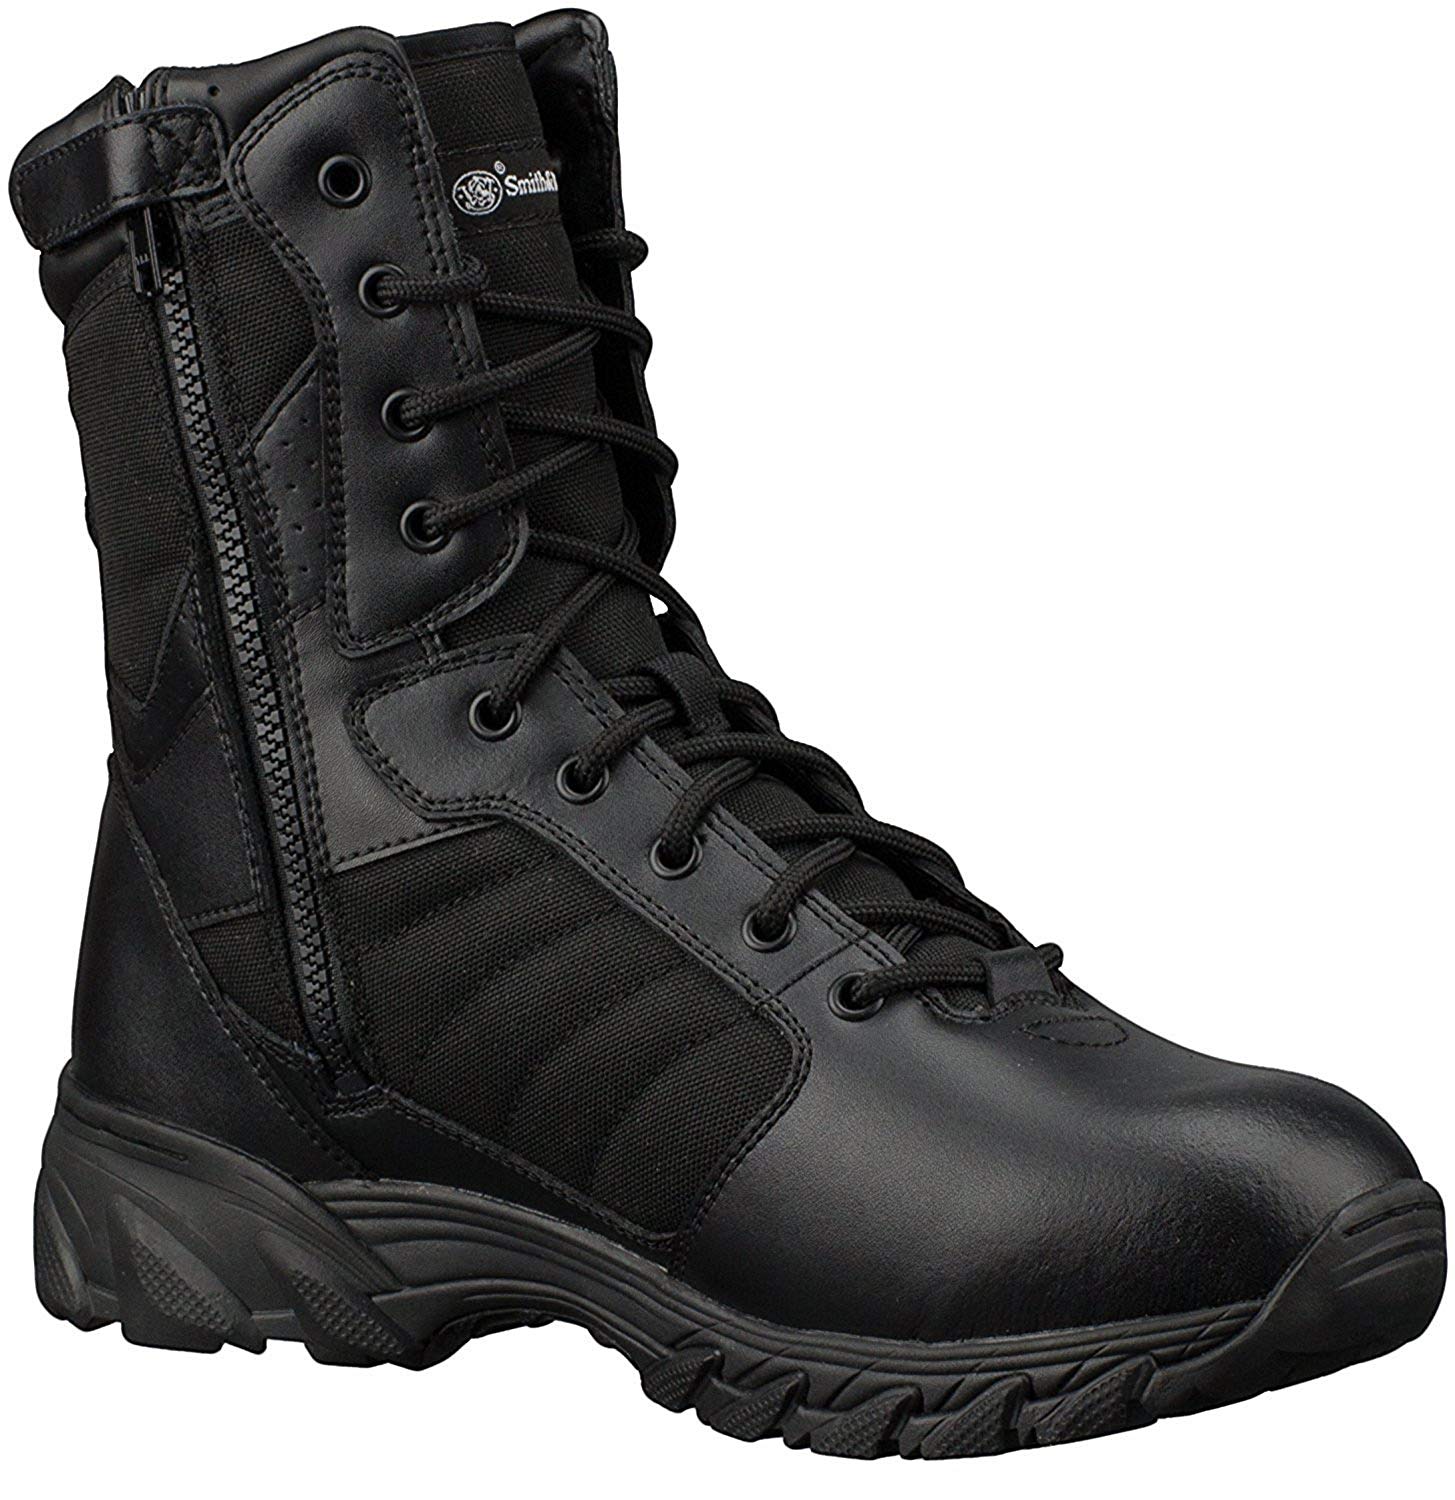 Smith & Wesson Footwear Men's Breach 2.0 Tactical Side Zip Boots - 8